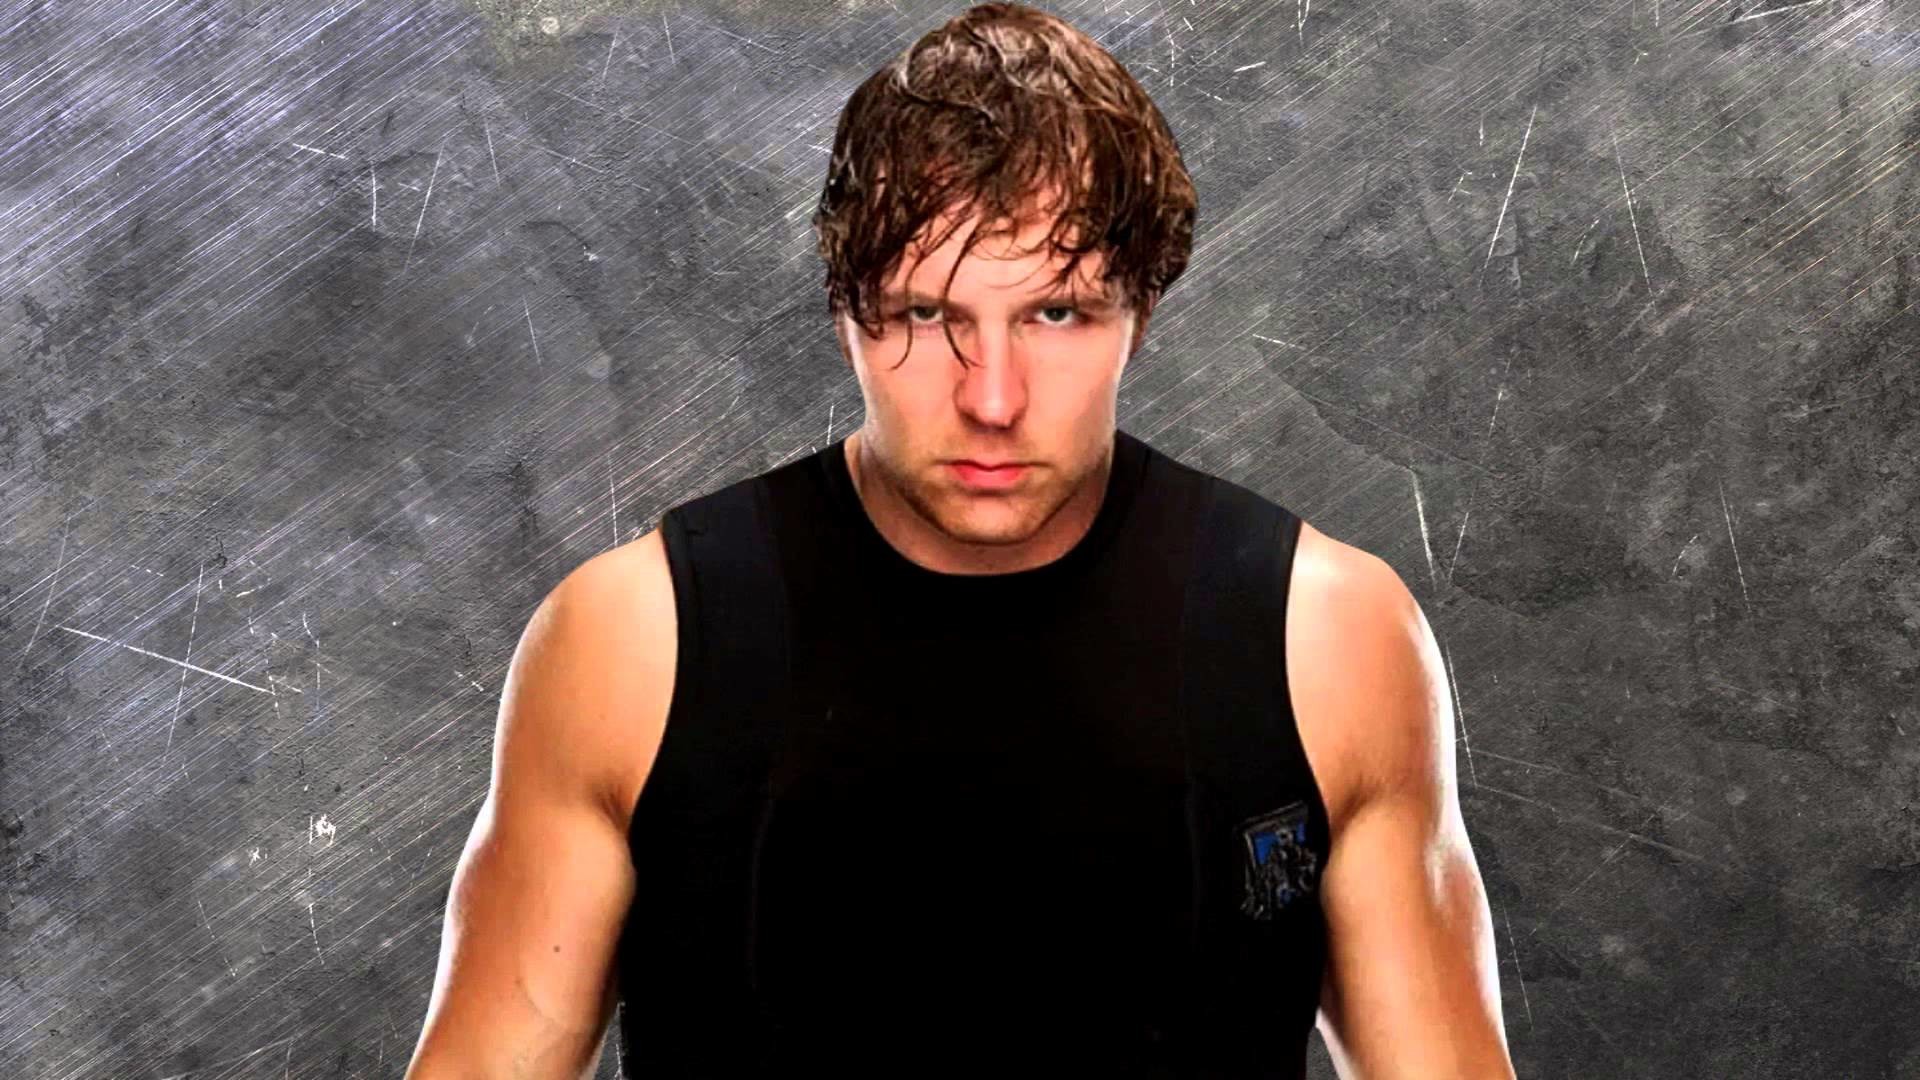 1920x1080 **NEW** Dean Ambrose 2nd WWE Theme Song "Nuts" + Download